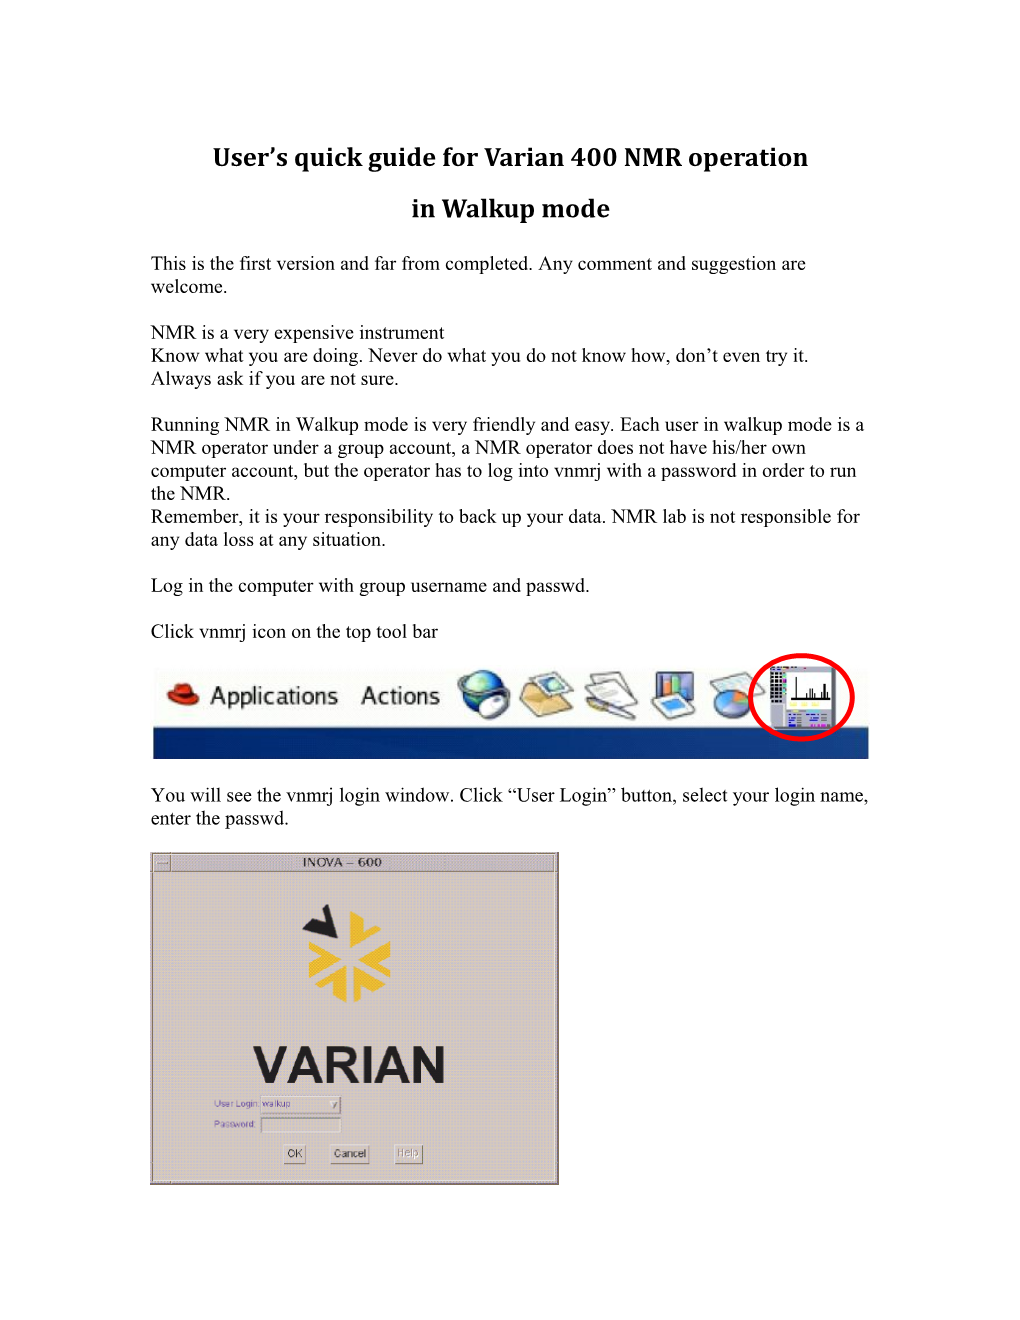 User Guide for Varian 500 NMR Operation in Walkup Mode